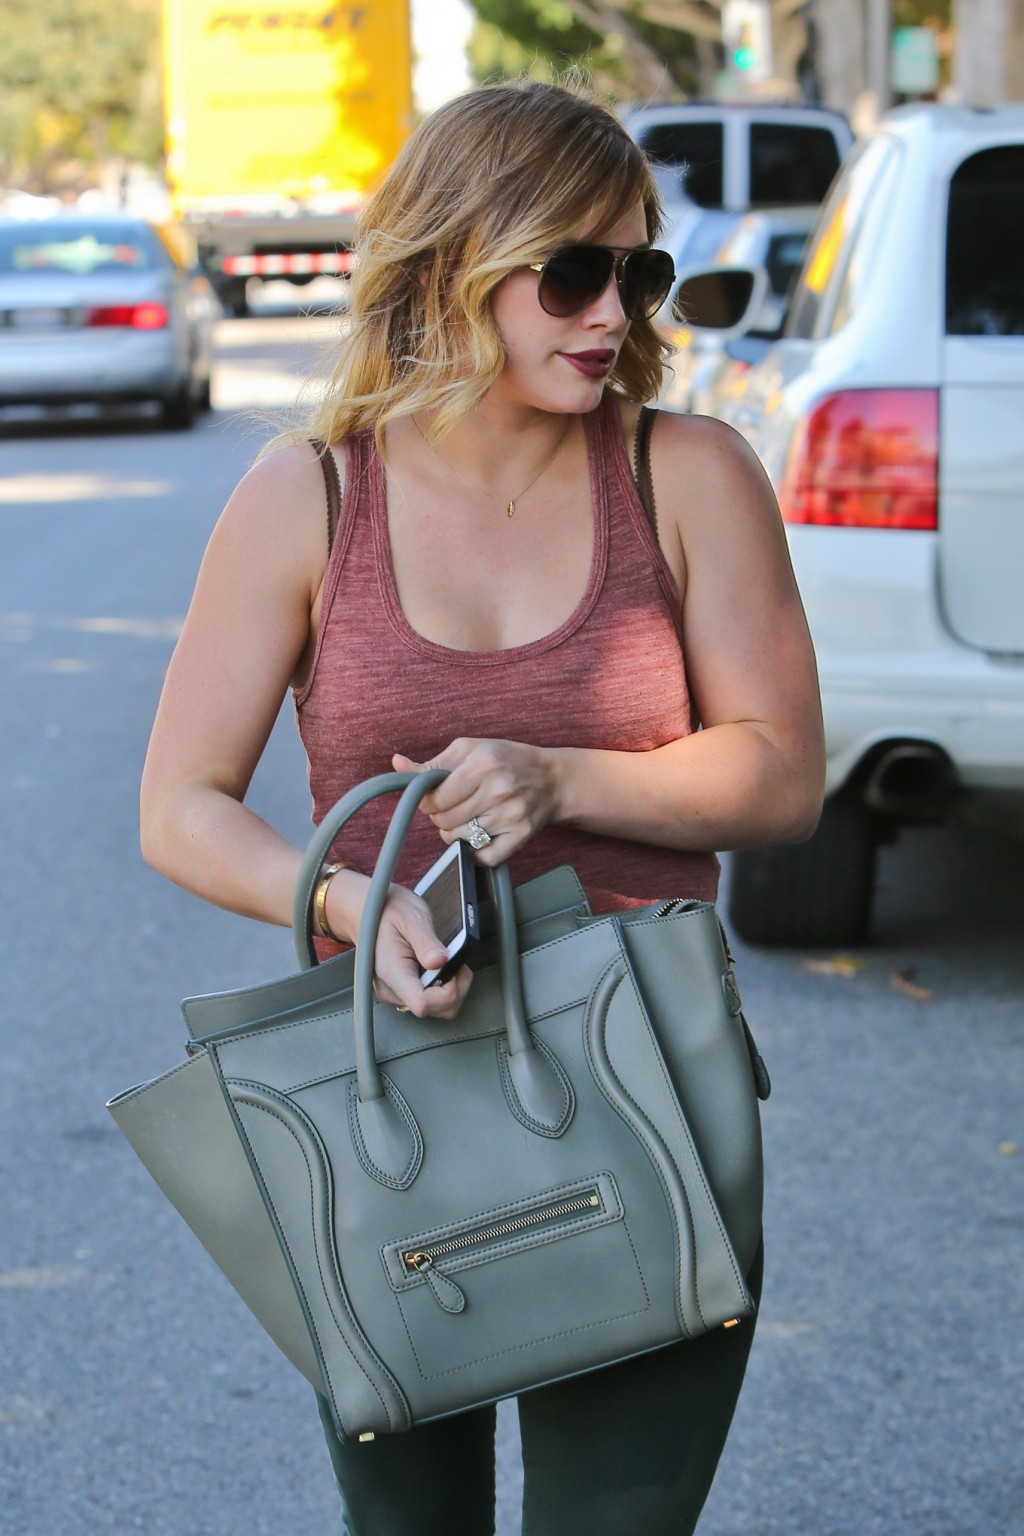 Hilary Duff wearing skimpy red top and tight jeans out in Beverly Hills #75234525